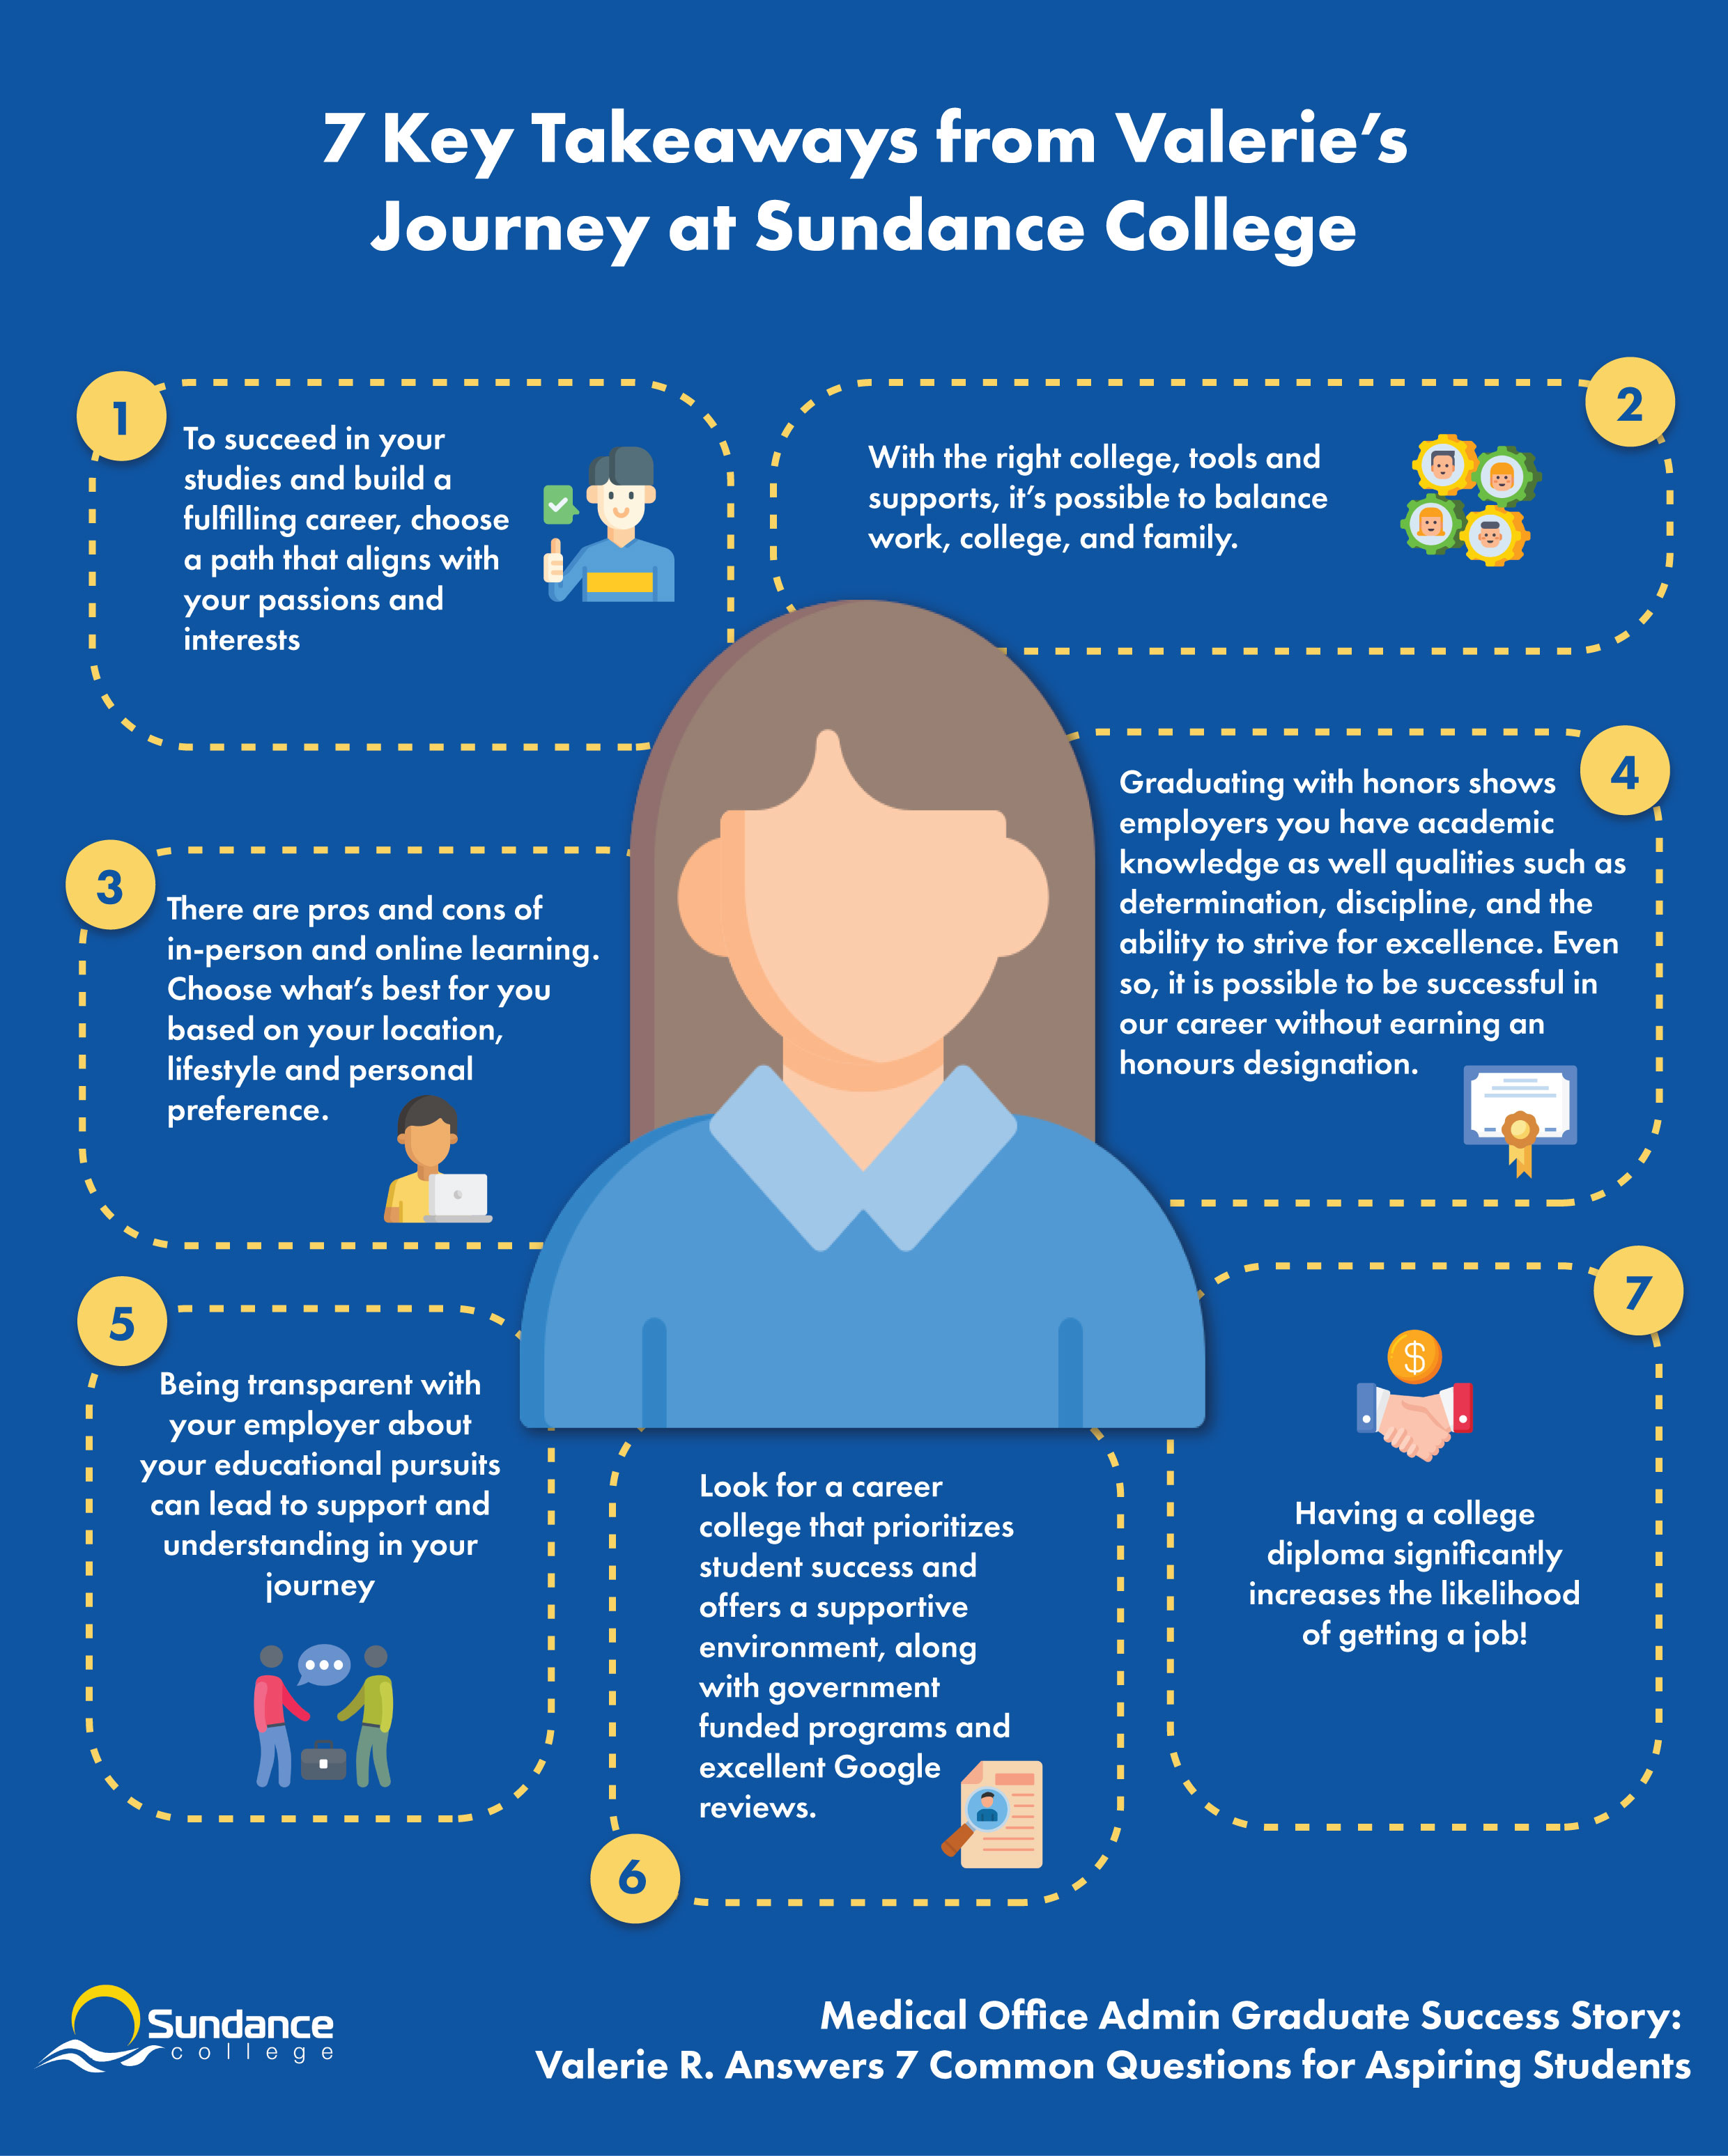 The infographic made by Sundance College with 7 key takeaways from a Medical Office Administration program graduate’s experience including 1) To succeed in your studies and build a fulfilling career, choose a path that aligns with your passions and interests; 2) With the right college, tools and support, it’s possible to balance work, college, and family; 3) There are pros and cons of in-person and online learning. Choose what’s best for you based on your location, lifestyle and personal preference; 4) Graduating with honors shows employers you have academic knowledge as well qualities such as determination, discipline, and the ability to strive for excellence. Even so, it is possible to be successful in our career without earning an honours designation; 5) Being transparent with your employer about your educational pursuits can lead to support and understanding in your journey; 6) Look for a career college that prioritizes student success and offers a supportive environment, along with government funded programs and excellent Google reviews; 7) Having a college diploma significantly increases the likelihood of getting a job.